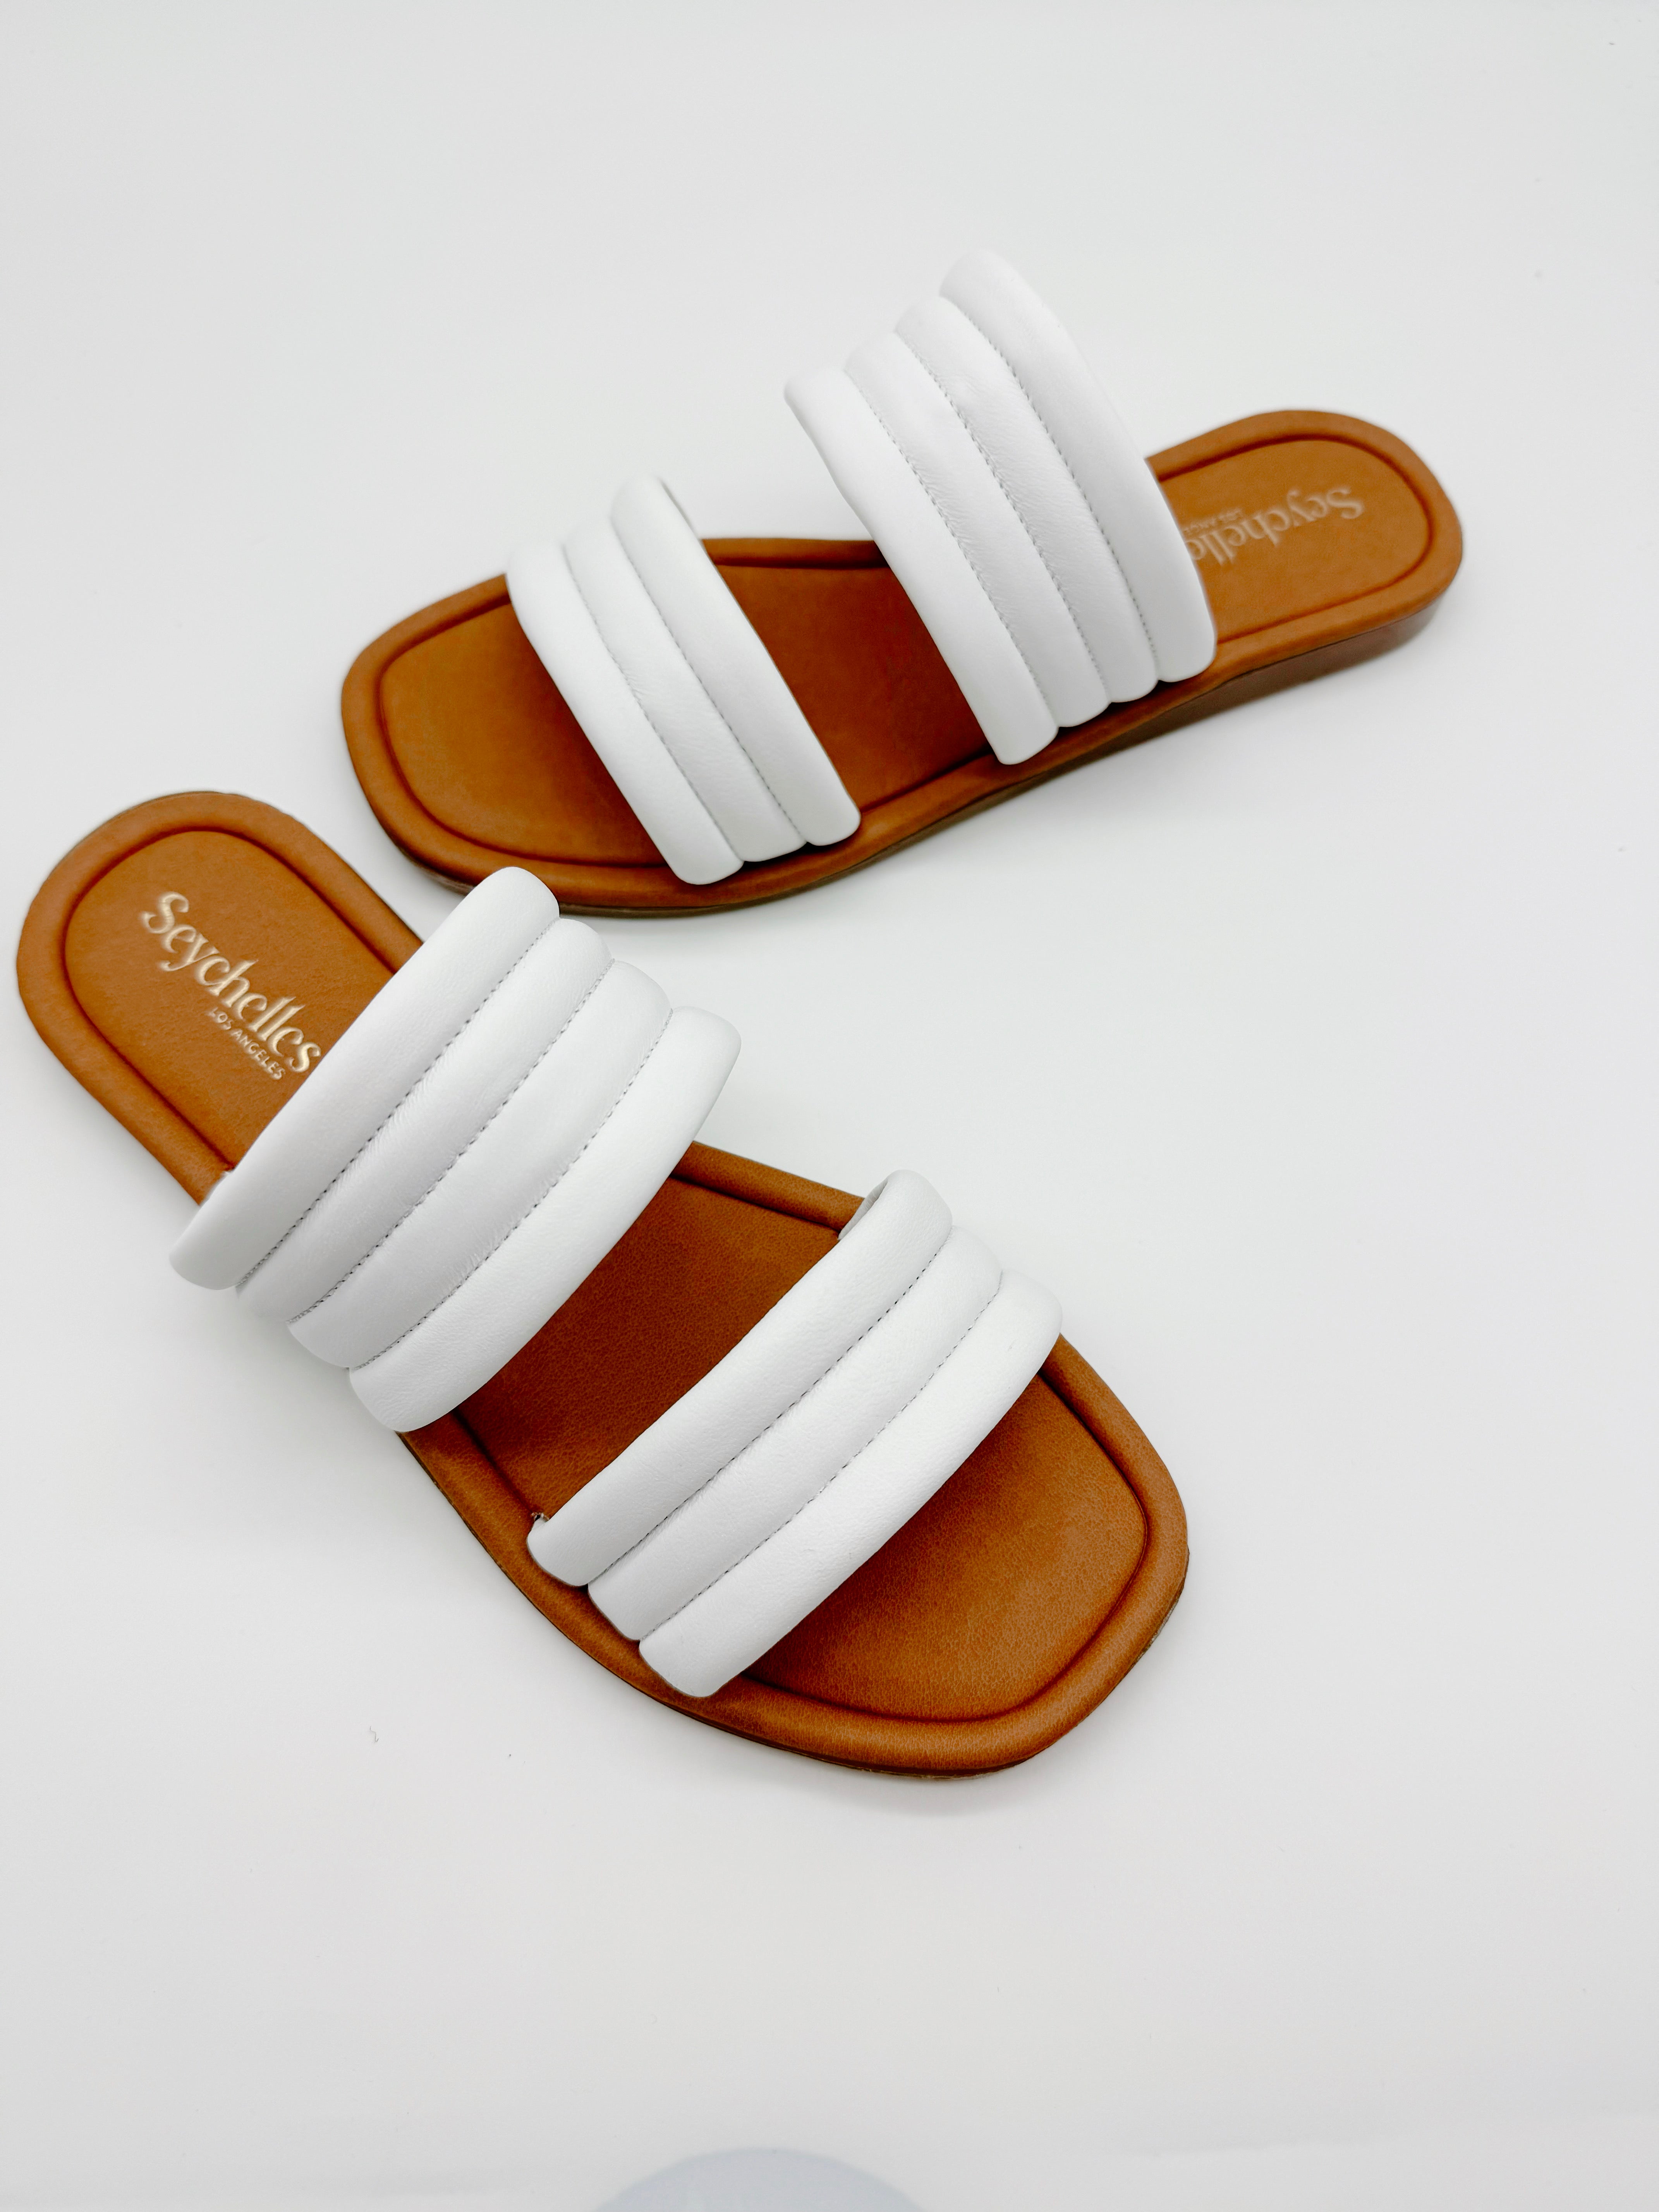 Seychelles Cape May Sandals in White Leather-312 Shoes-Little Bird Boutique